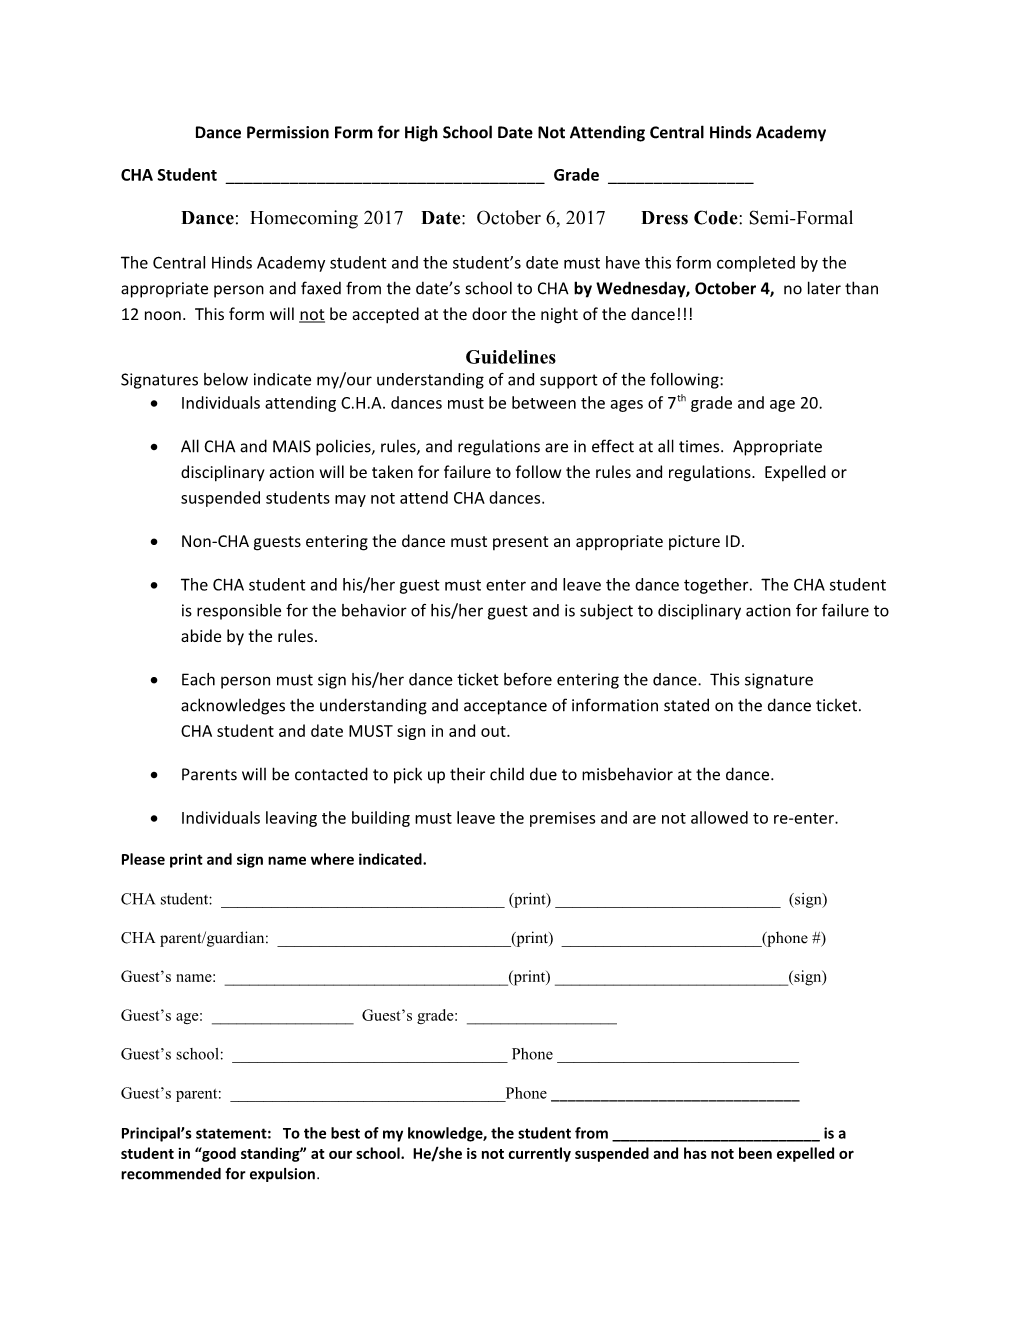 Dance Permission Form for High School Date Not Attending Central Hinds Academy